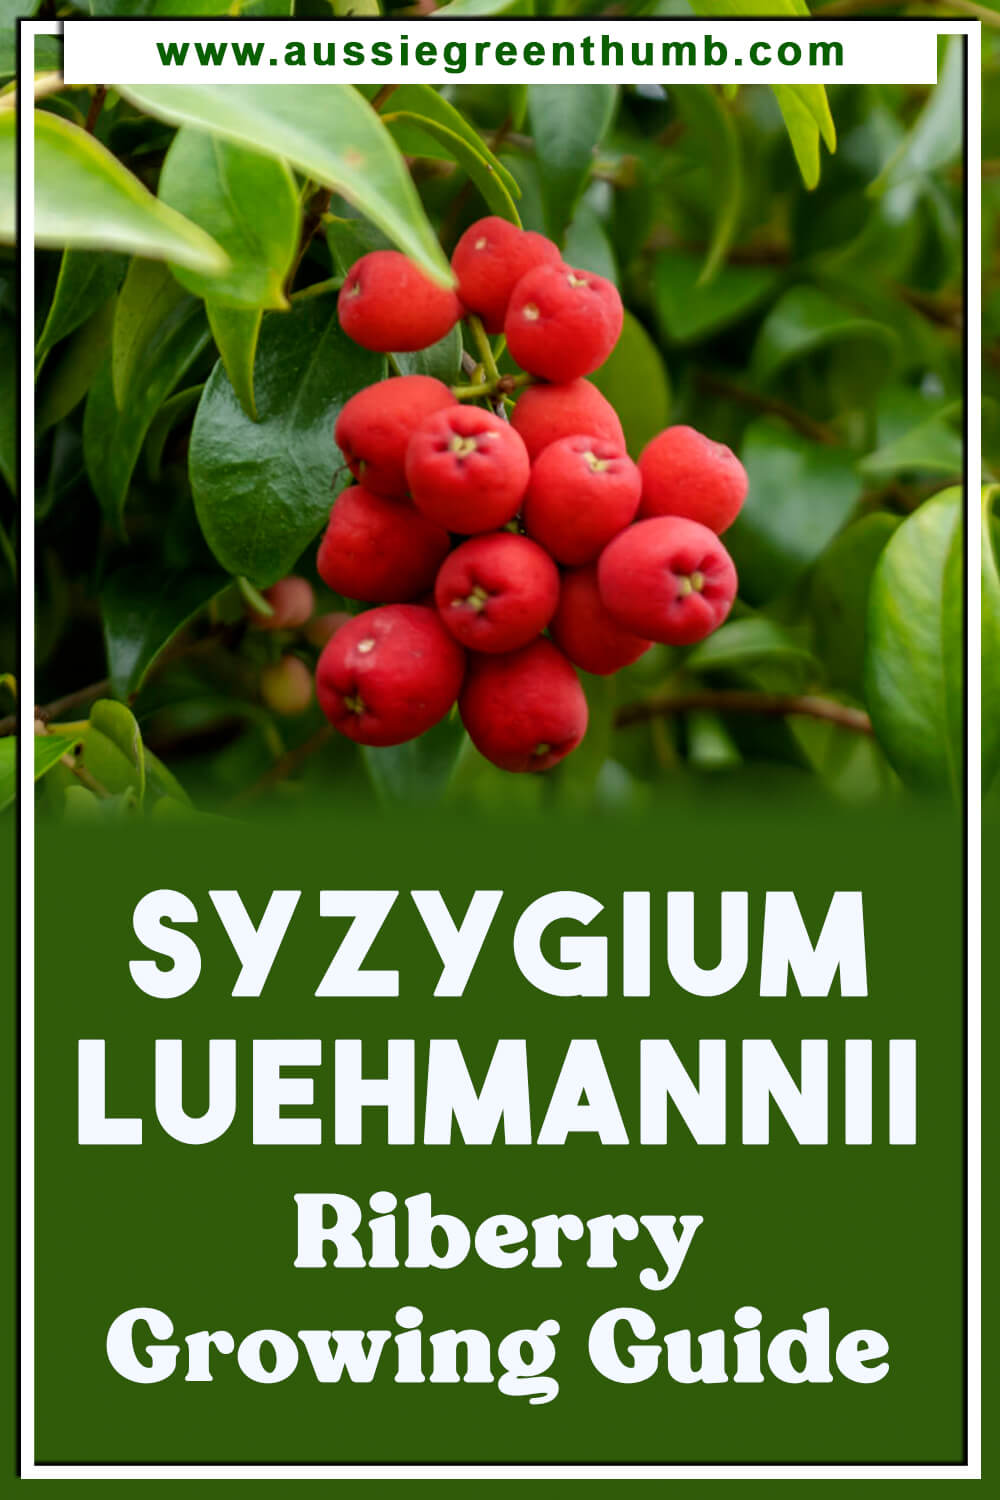 Syzygium Luehmannii Riberry Growing Guide